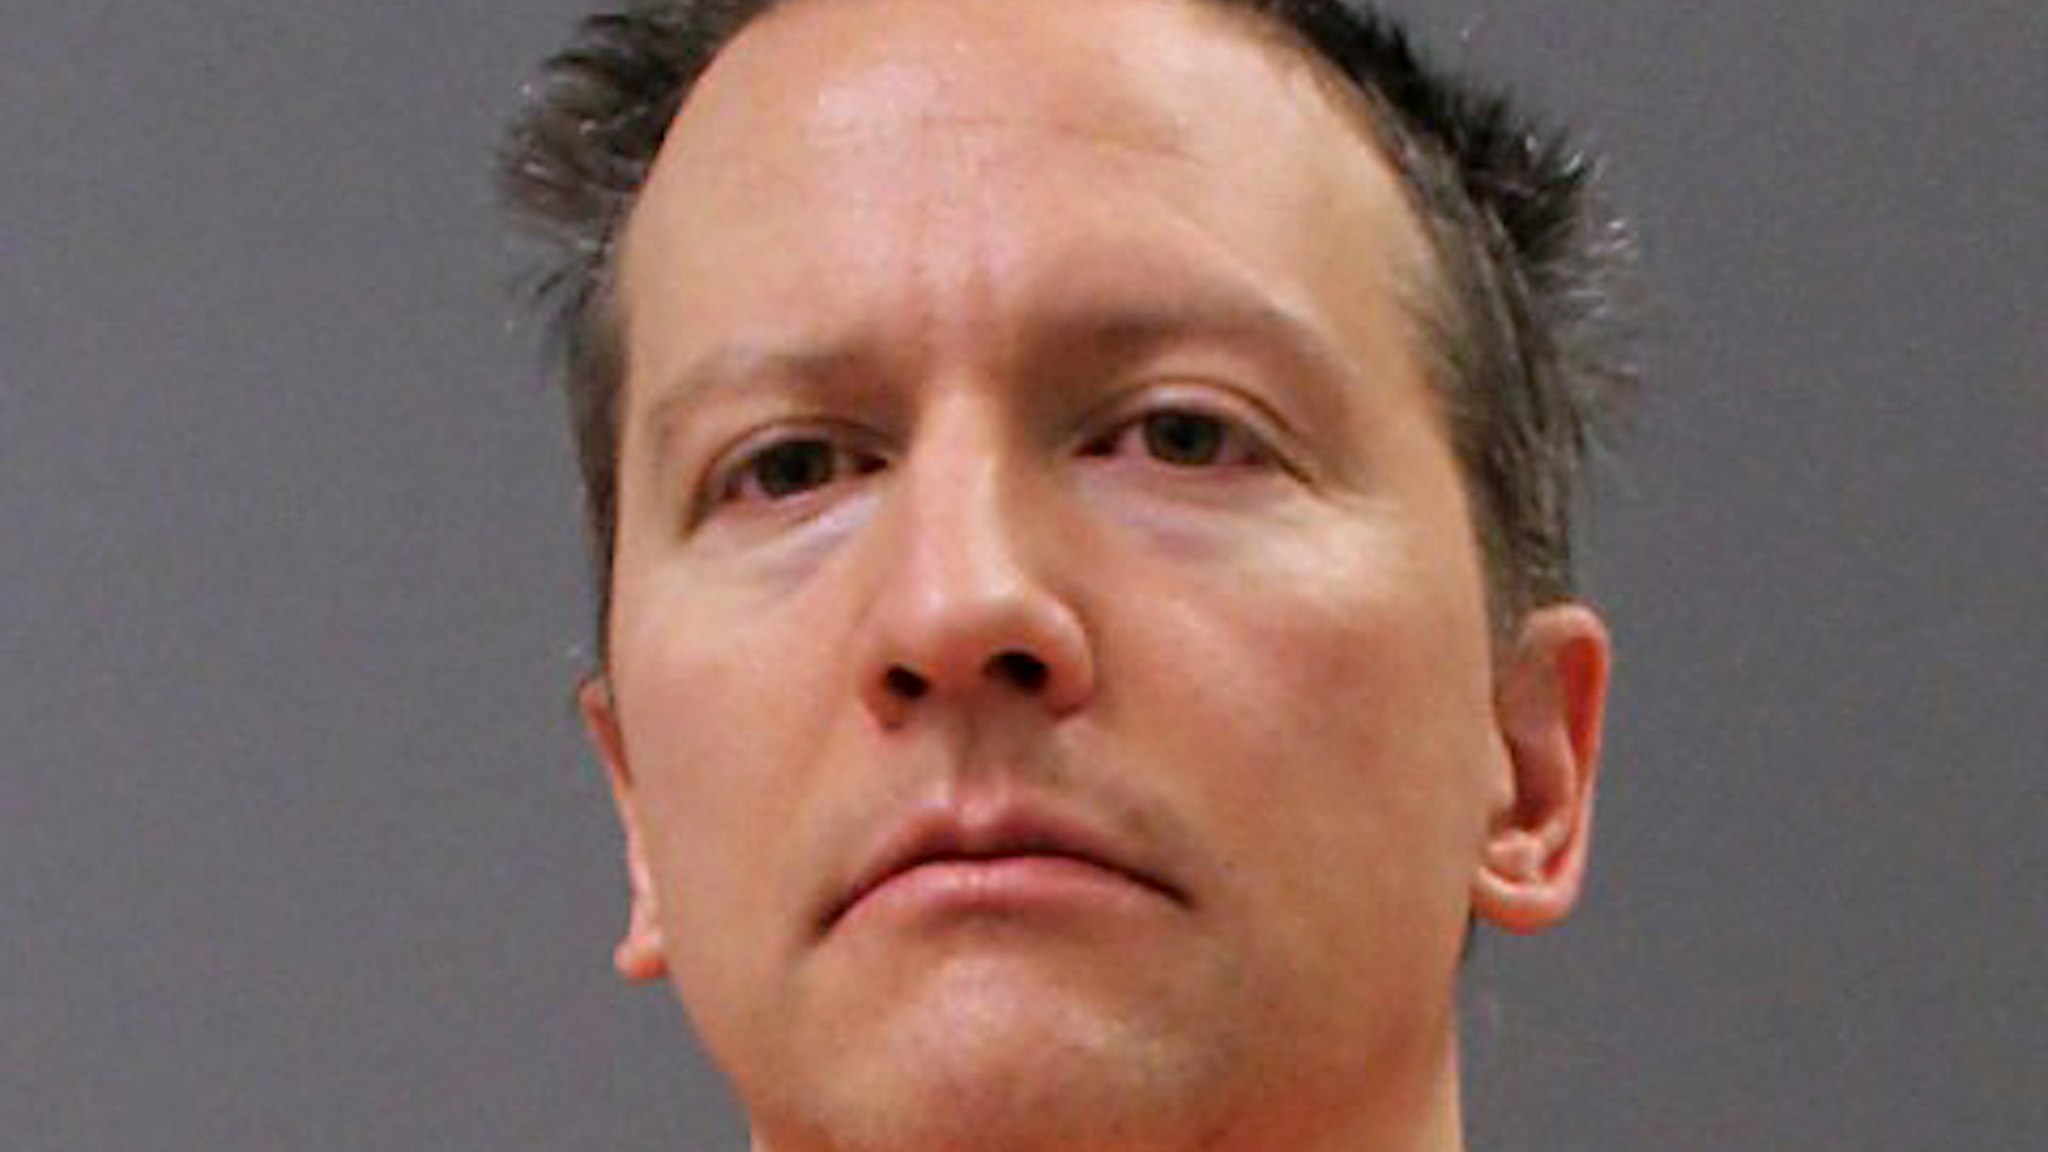 MINNEAPOLIS, MN - APRIL 21: In this photo provided by the Minnesota Department of Corrections, former Minneapolis police officer Derek Chauvin poses for a booking photo after his conviction April 21, 2021 in Minneapolis, Minnesota. Chauvin was found guilty on all three charges in the murder of George Floyd. (Photo by Minnesota Department of Corrections via Getty Images)